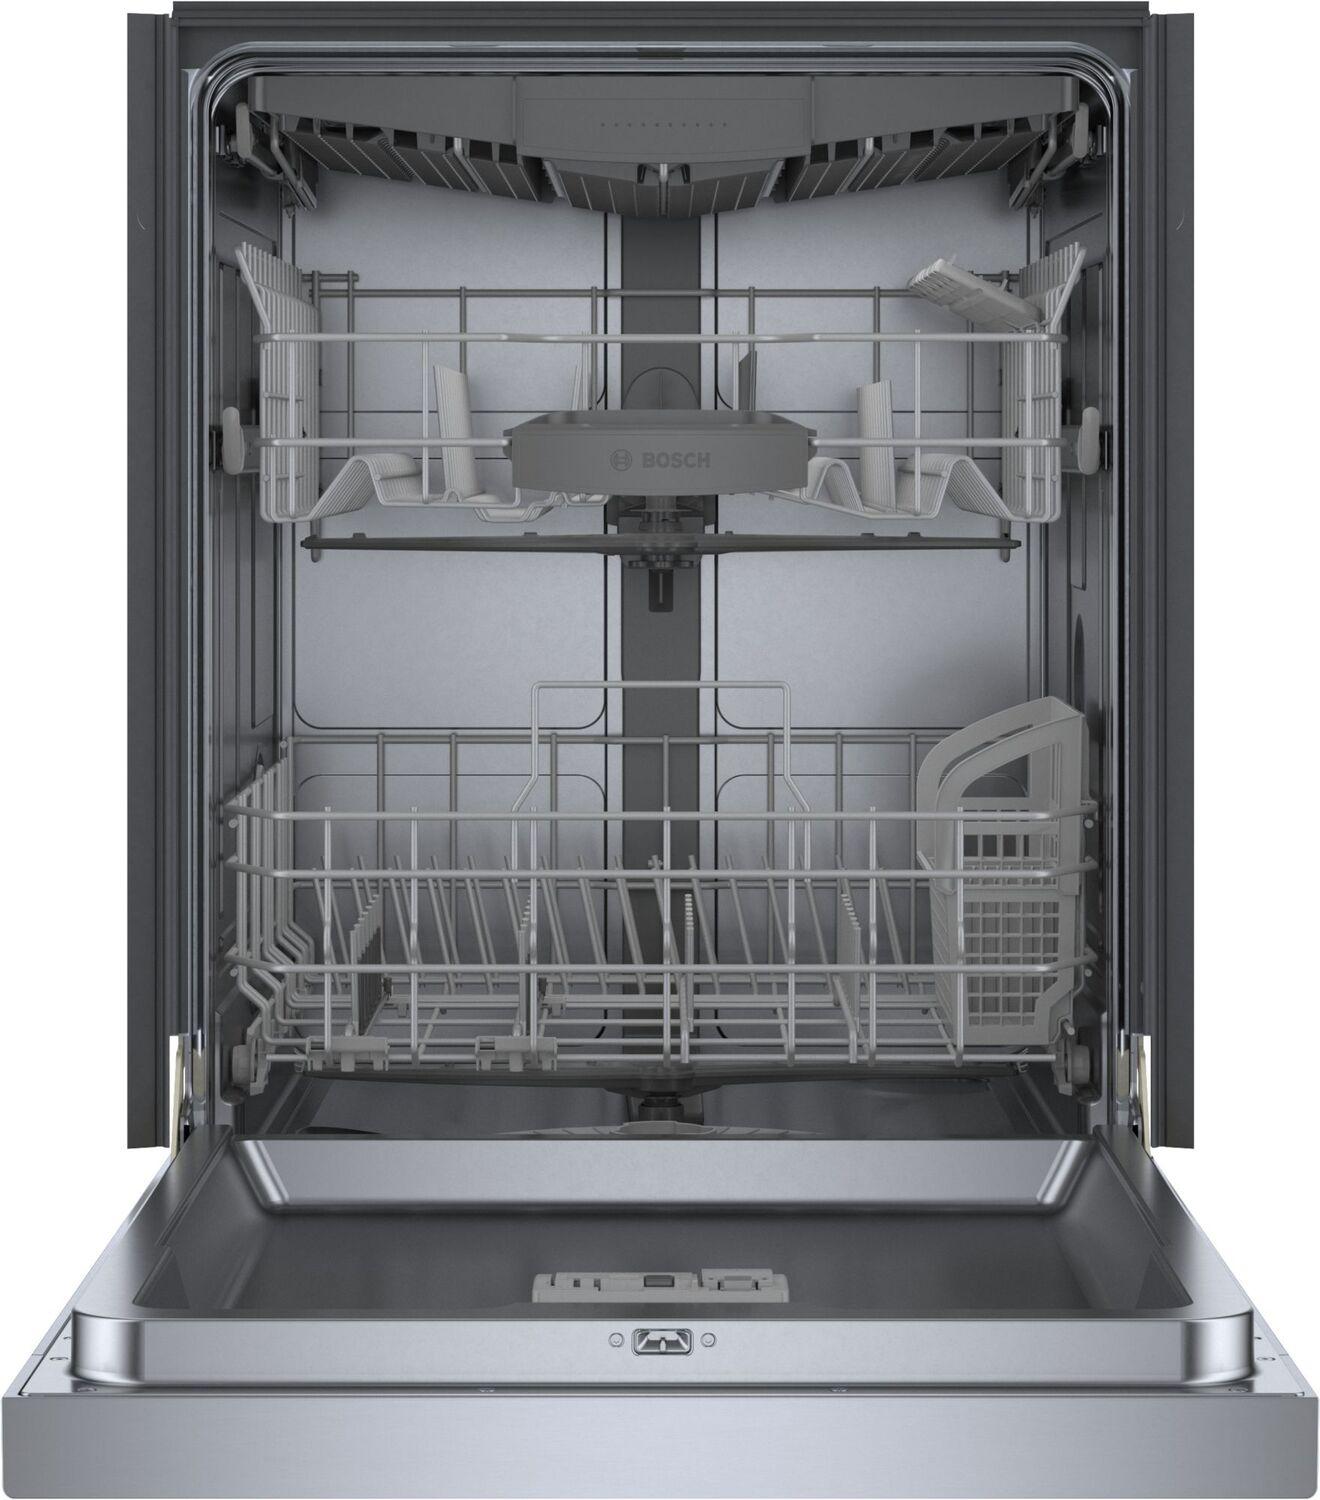 Bosch SHE53C85N 300 Series Dishwasher 24" Stainless Steel